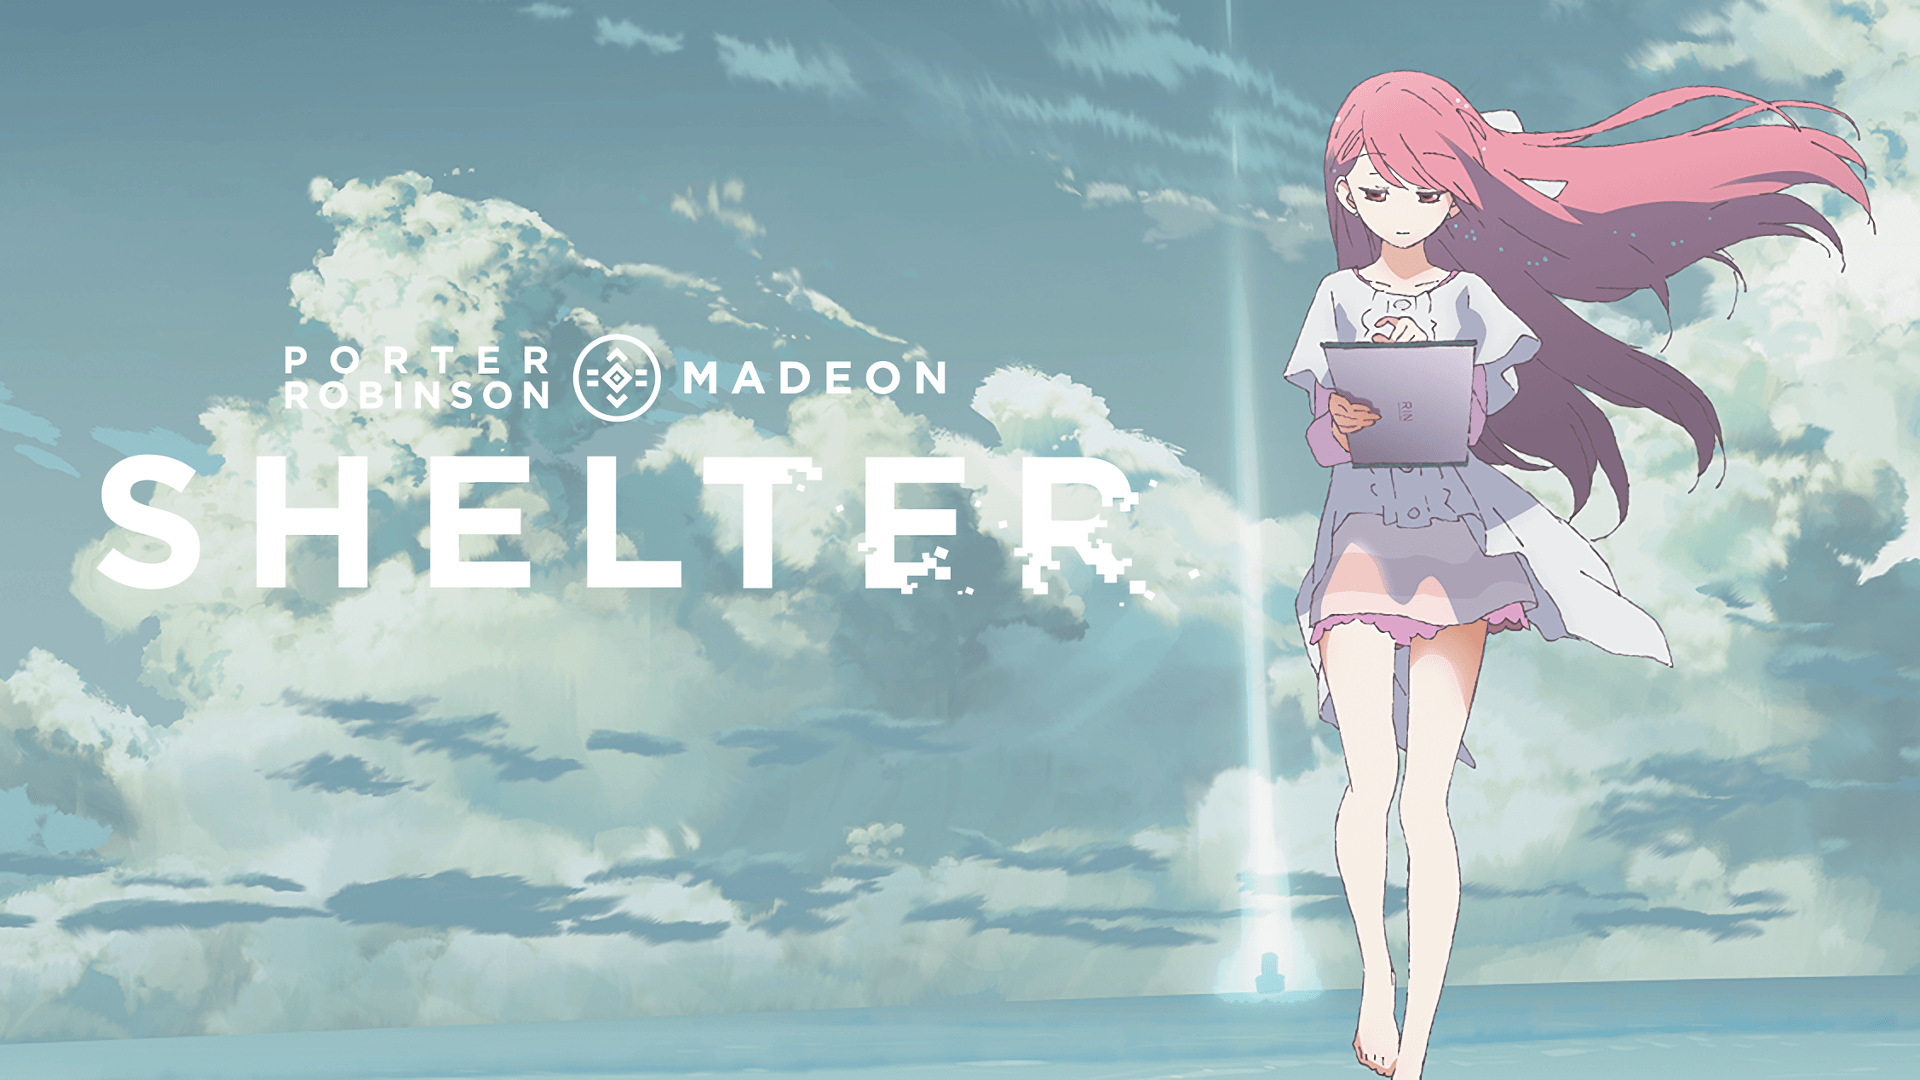 Anime 1920x1080 Shelter (anime music video) darling sea water blue clouds table rose